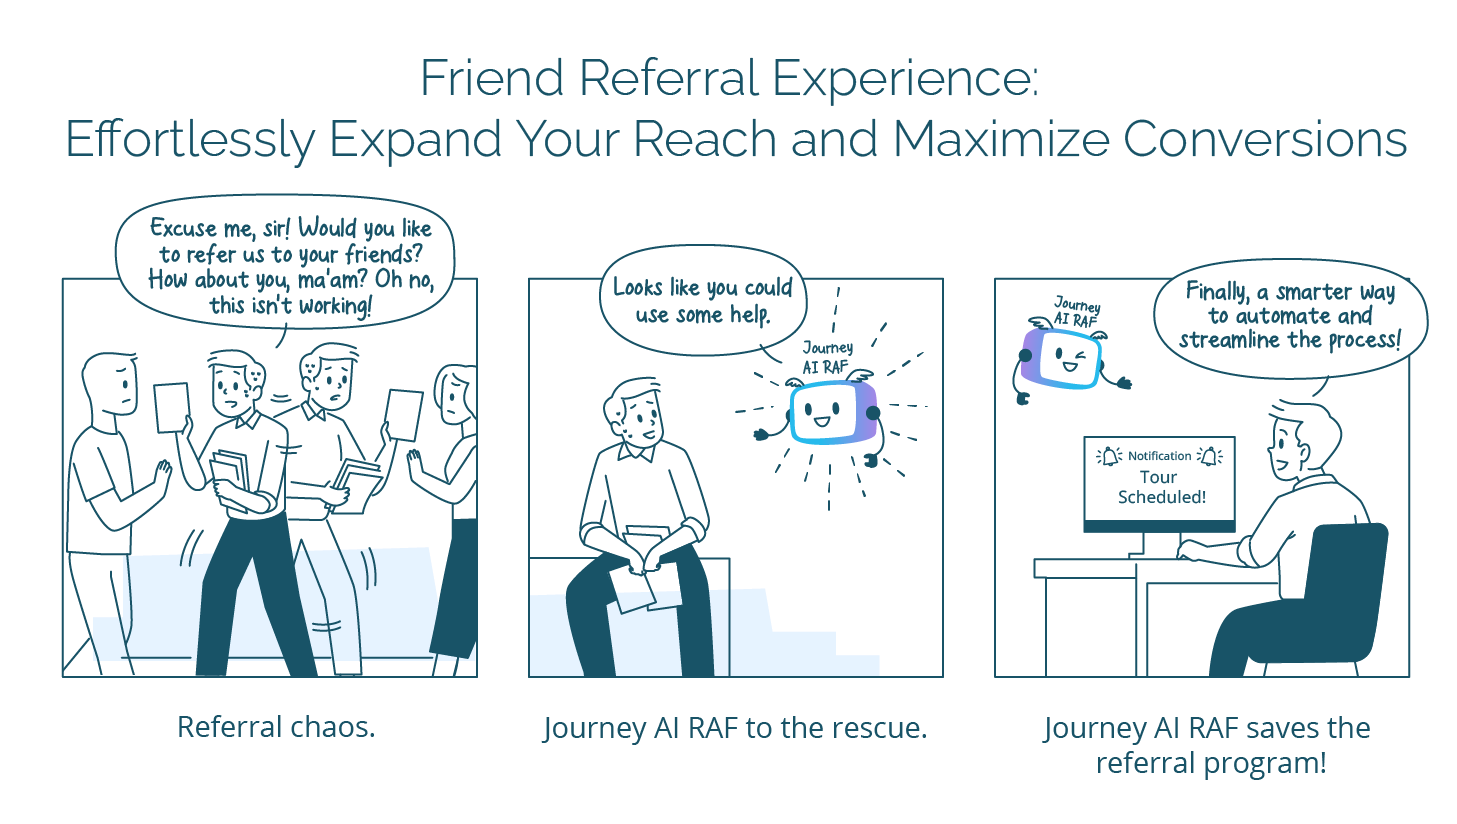 Friend Referral Experience - Hero image